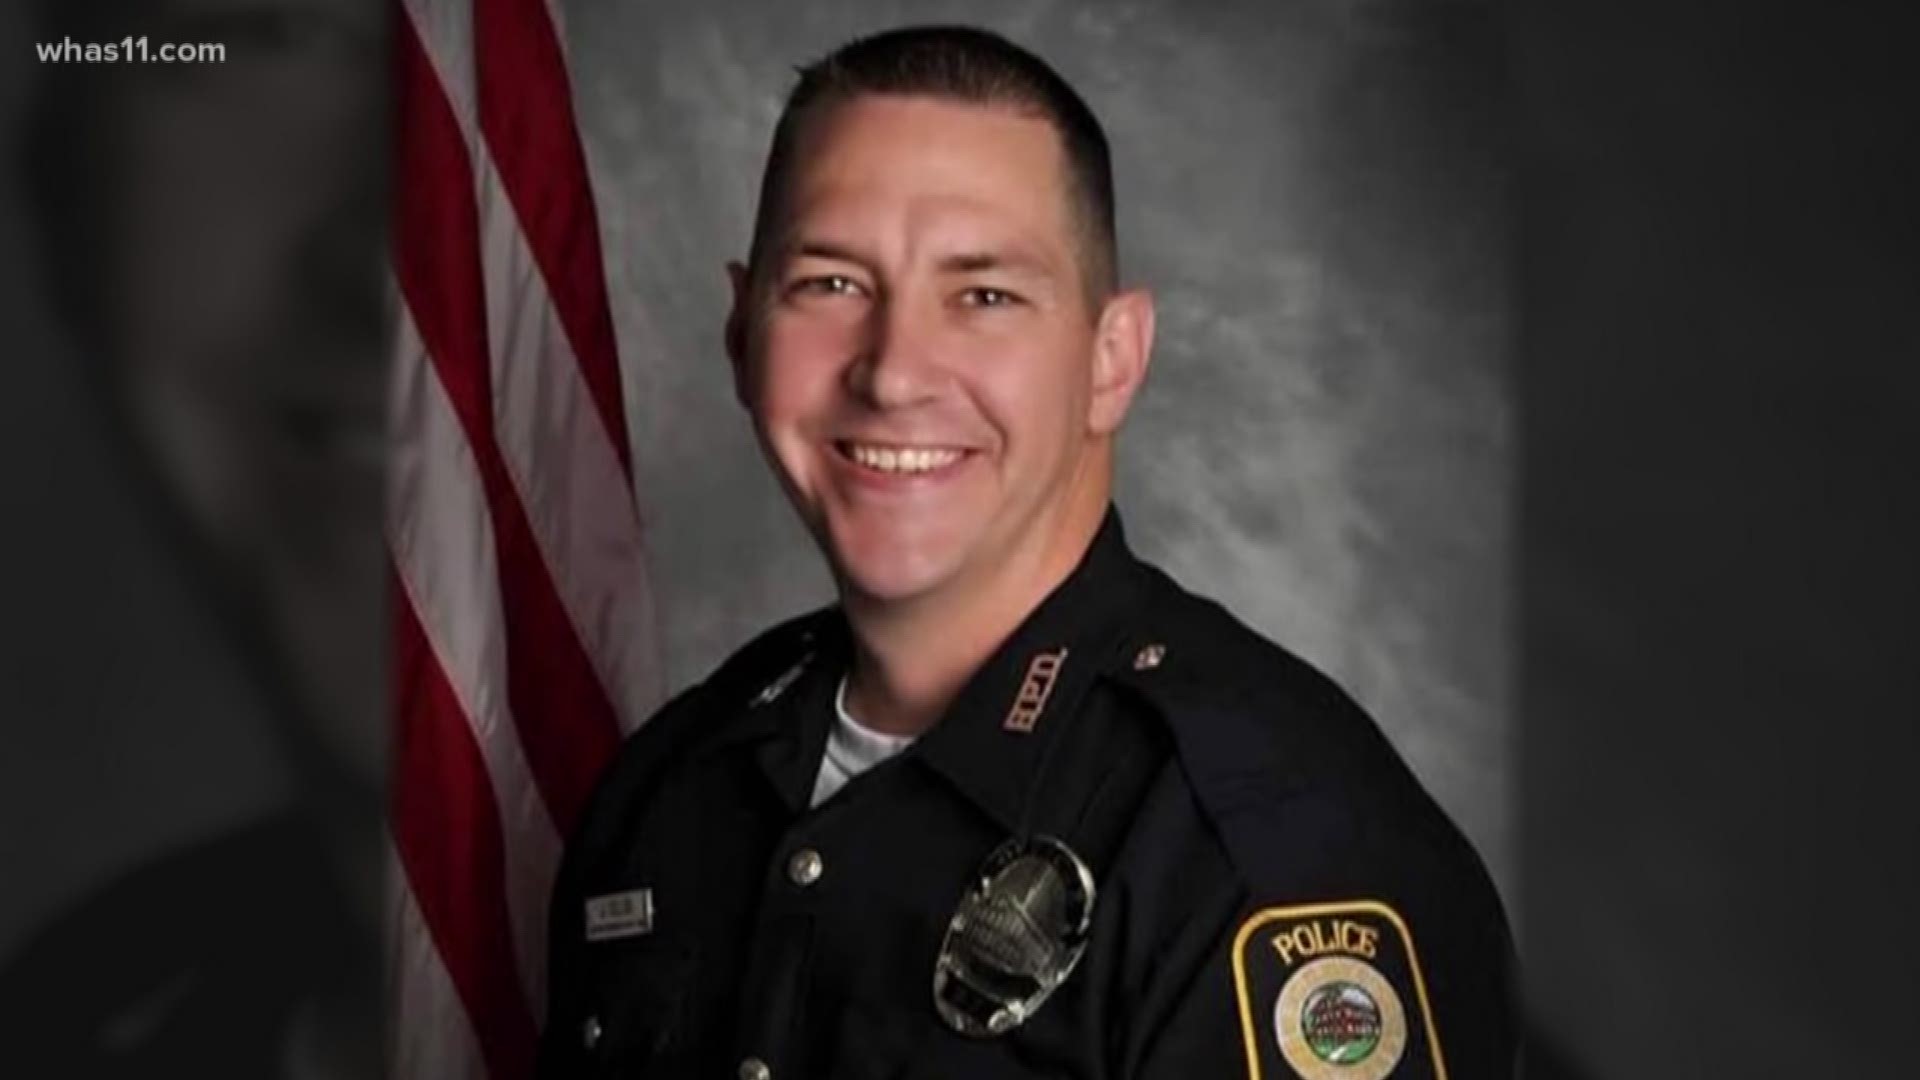 A gunman killed officer Jason Ellis on May 25, 2013 after he finished his shift for the Bardstown Police Department.